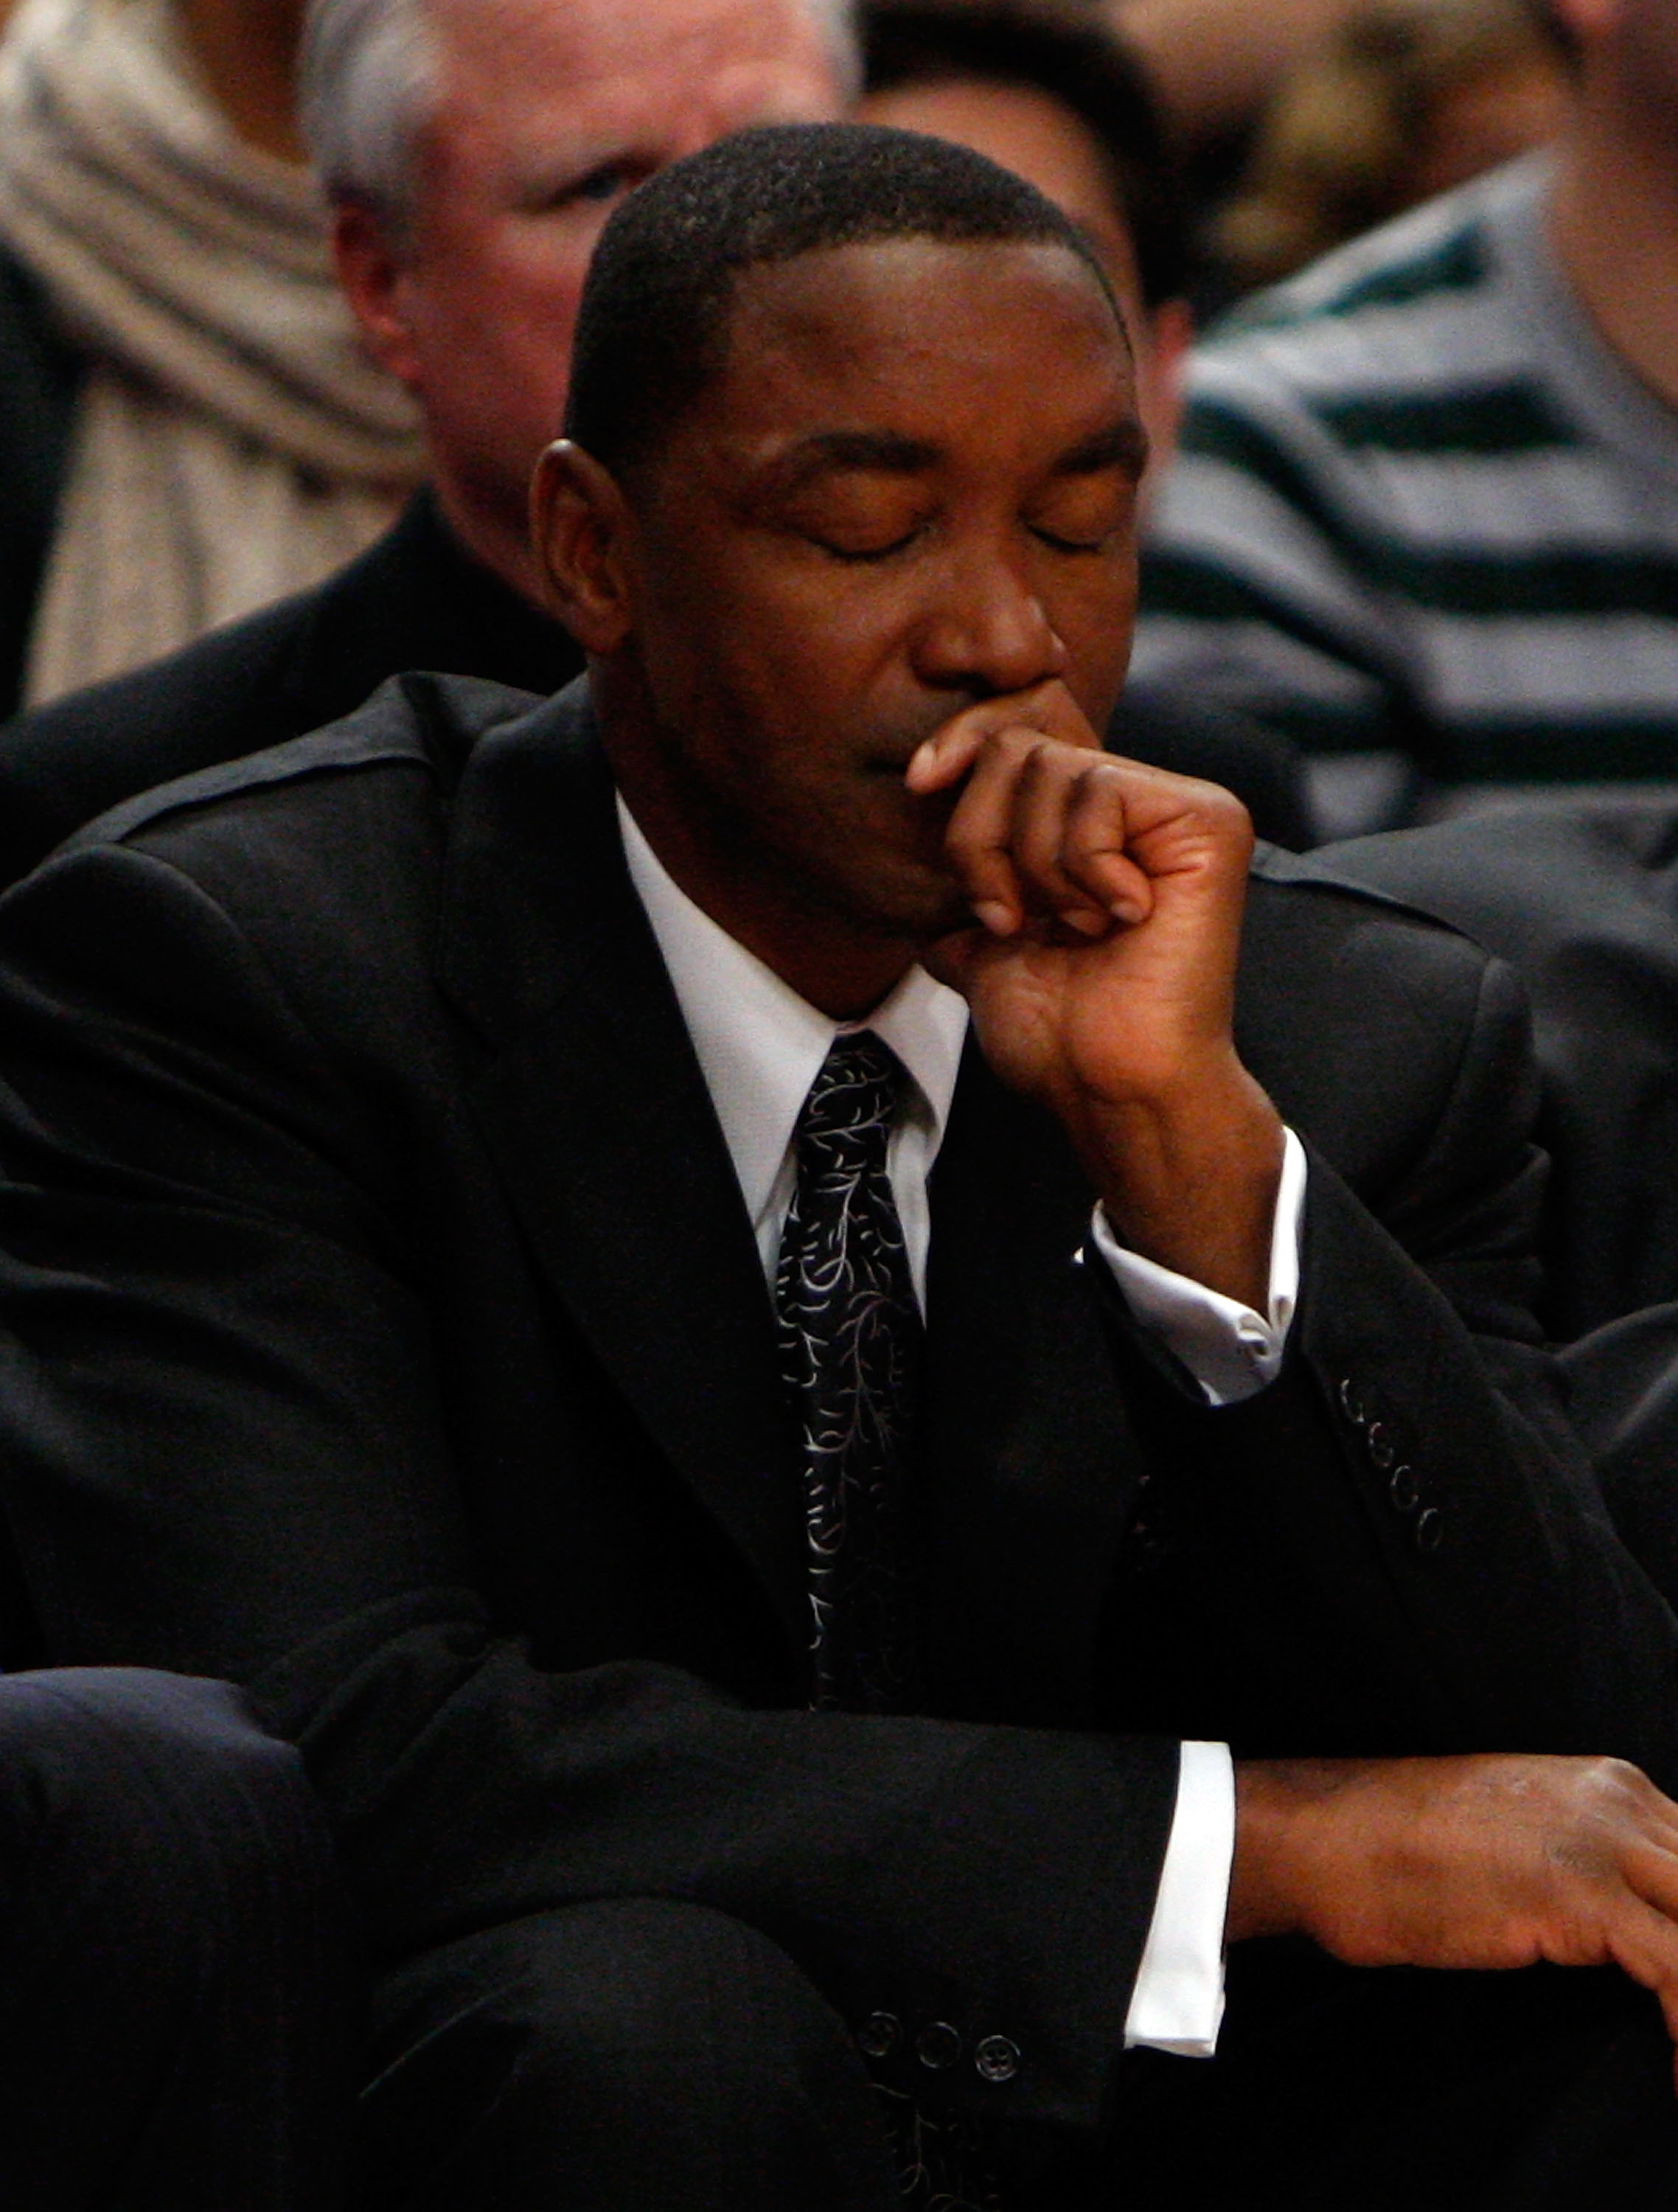 NEW YORK - MARCH 08:  Head coach Isiah Thomas of the New York Knicks watches from the sideline against the Portland Trail Blazers at Madison Square Garden March 8, 2008 in New York City. NOTE TO USER: User expressly acknowledges and agrees that, by downlo